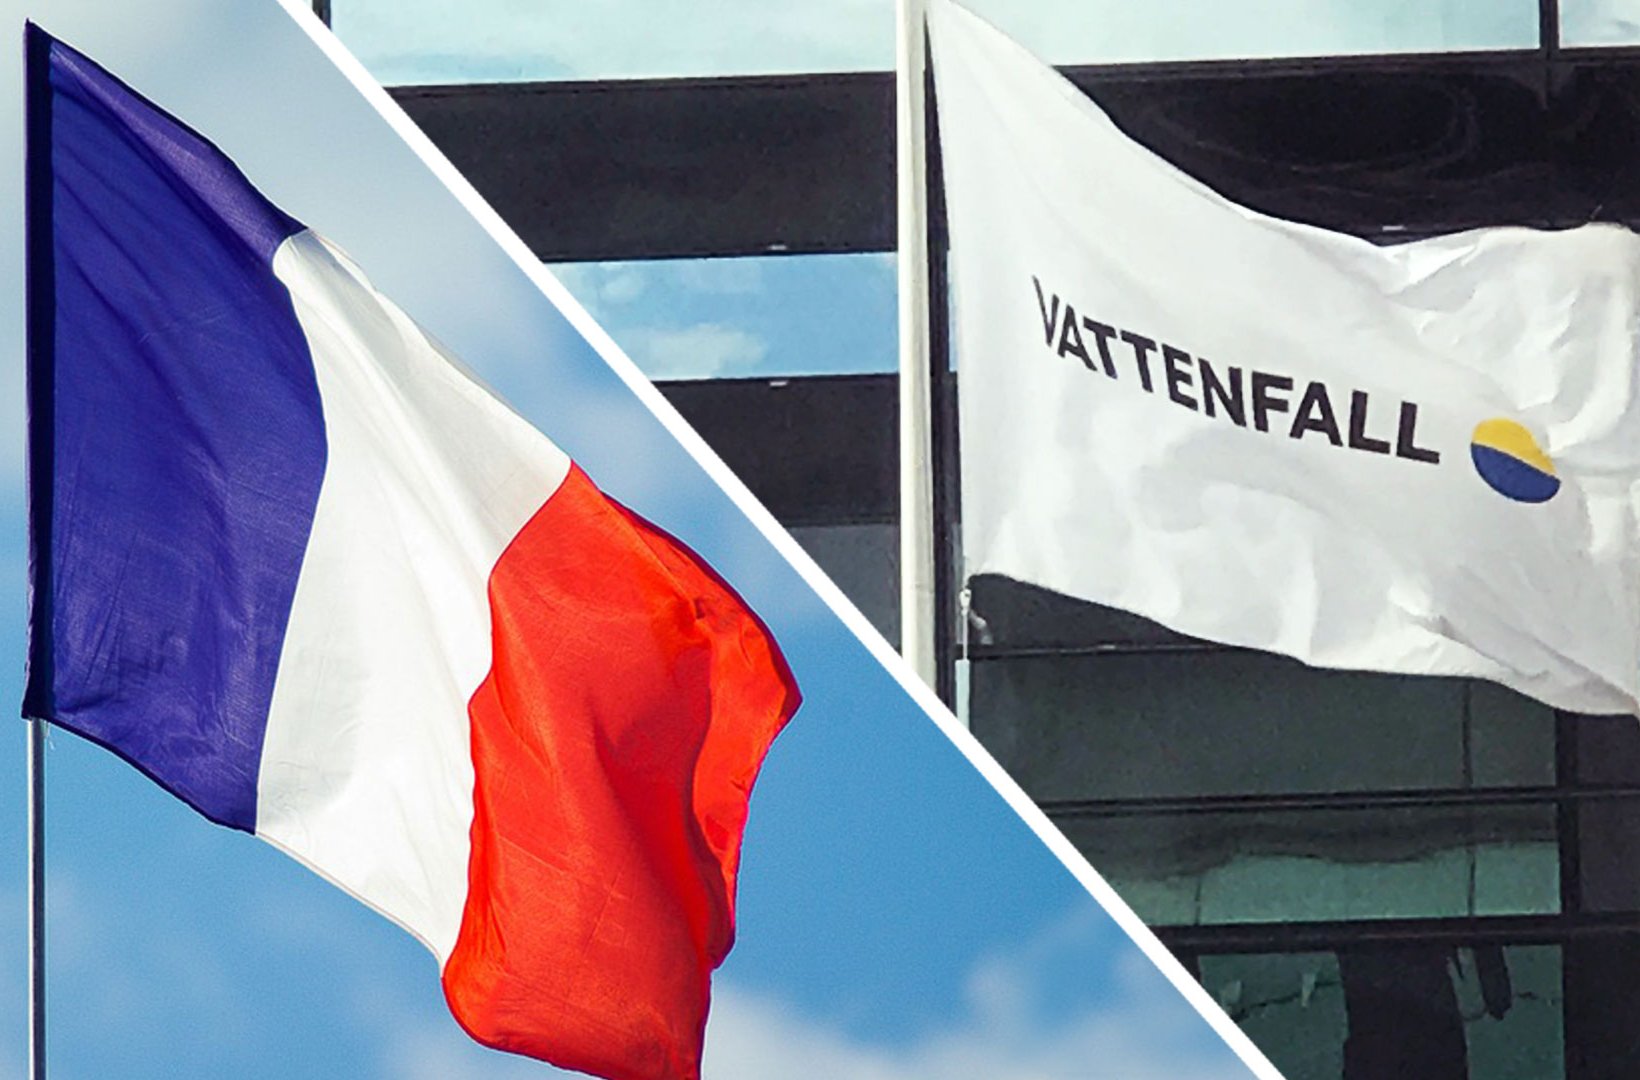 The French flag and a Vattenfall flag side by side